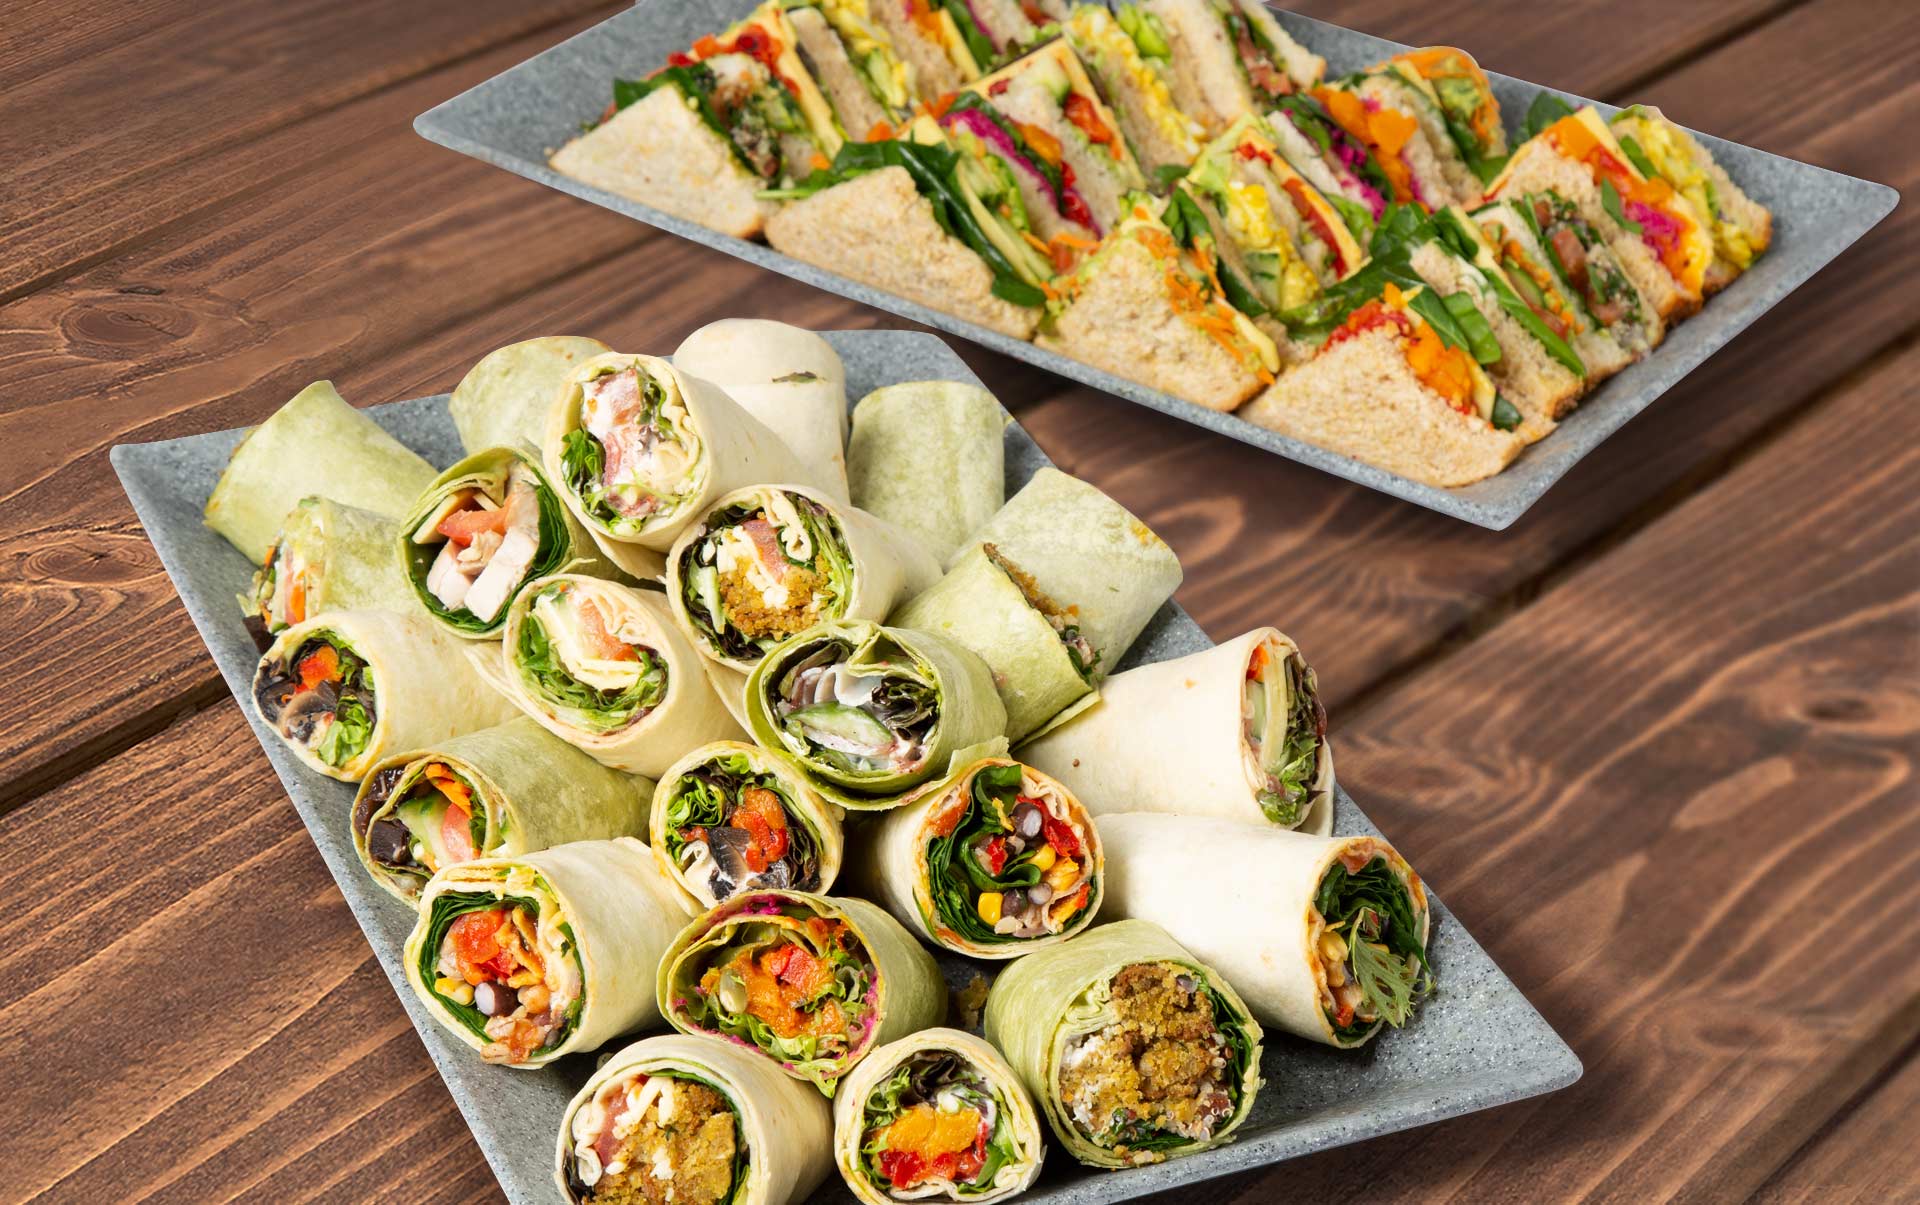 Platter of sandwiches and wraps